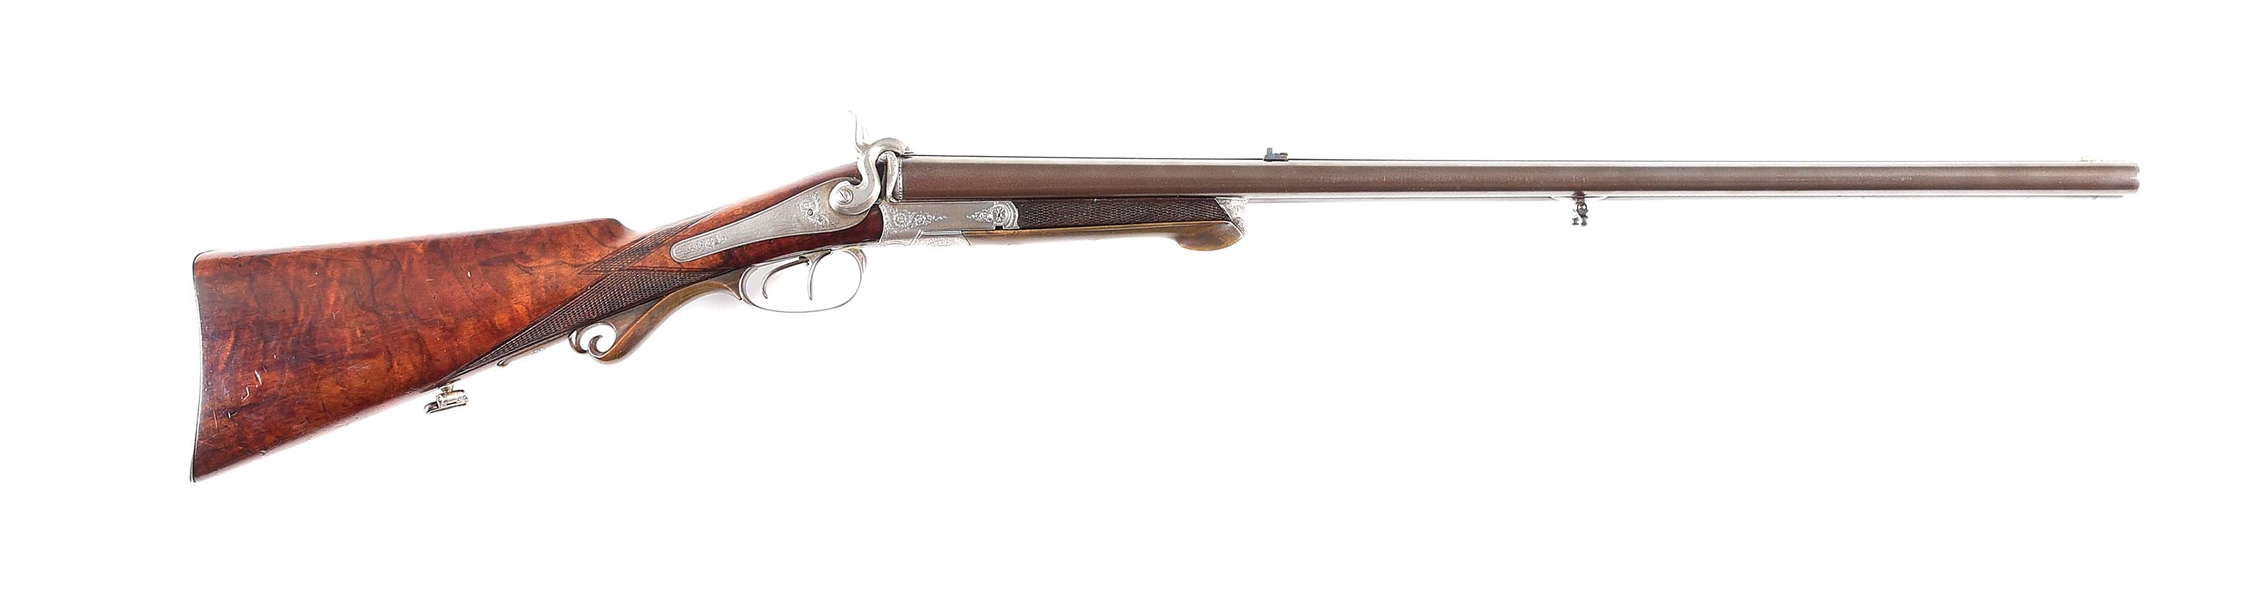 (A) SCHILLING 20 BORE SIDE BY SIDE PINFIRE RIFLE.